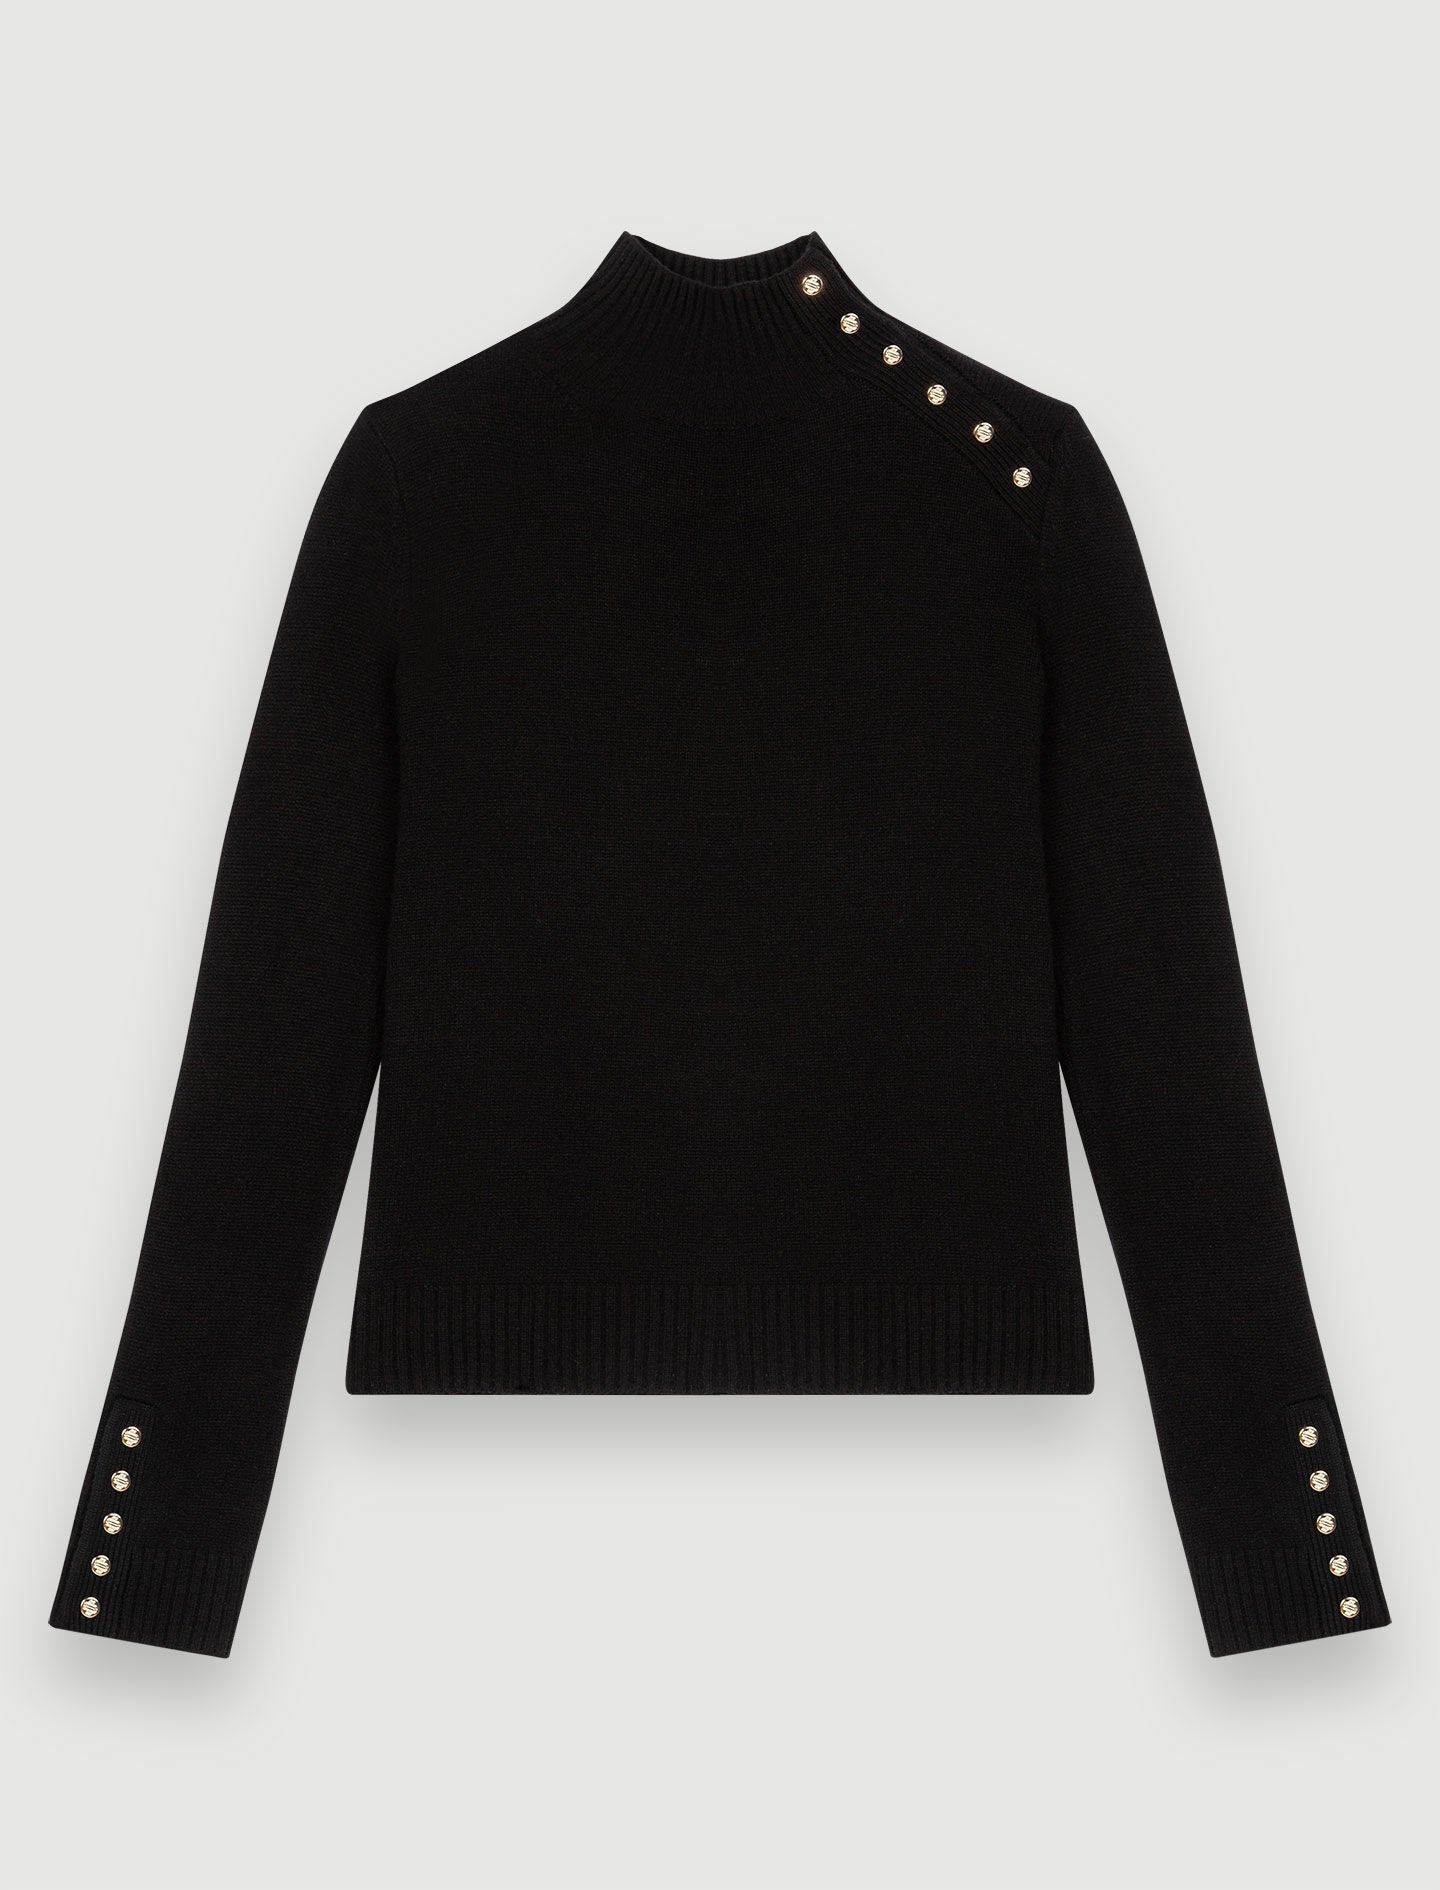 Black-cashmere jumper with gold snap buttons